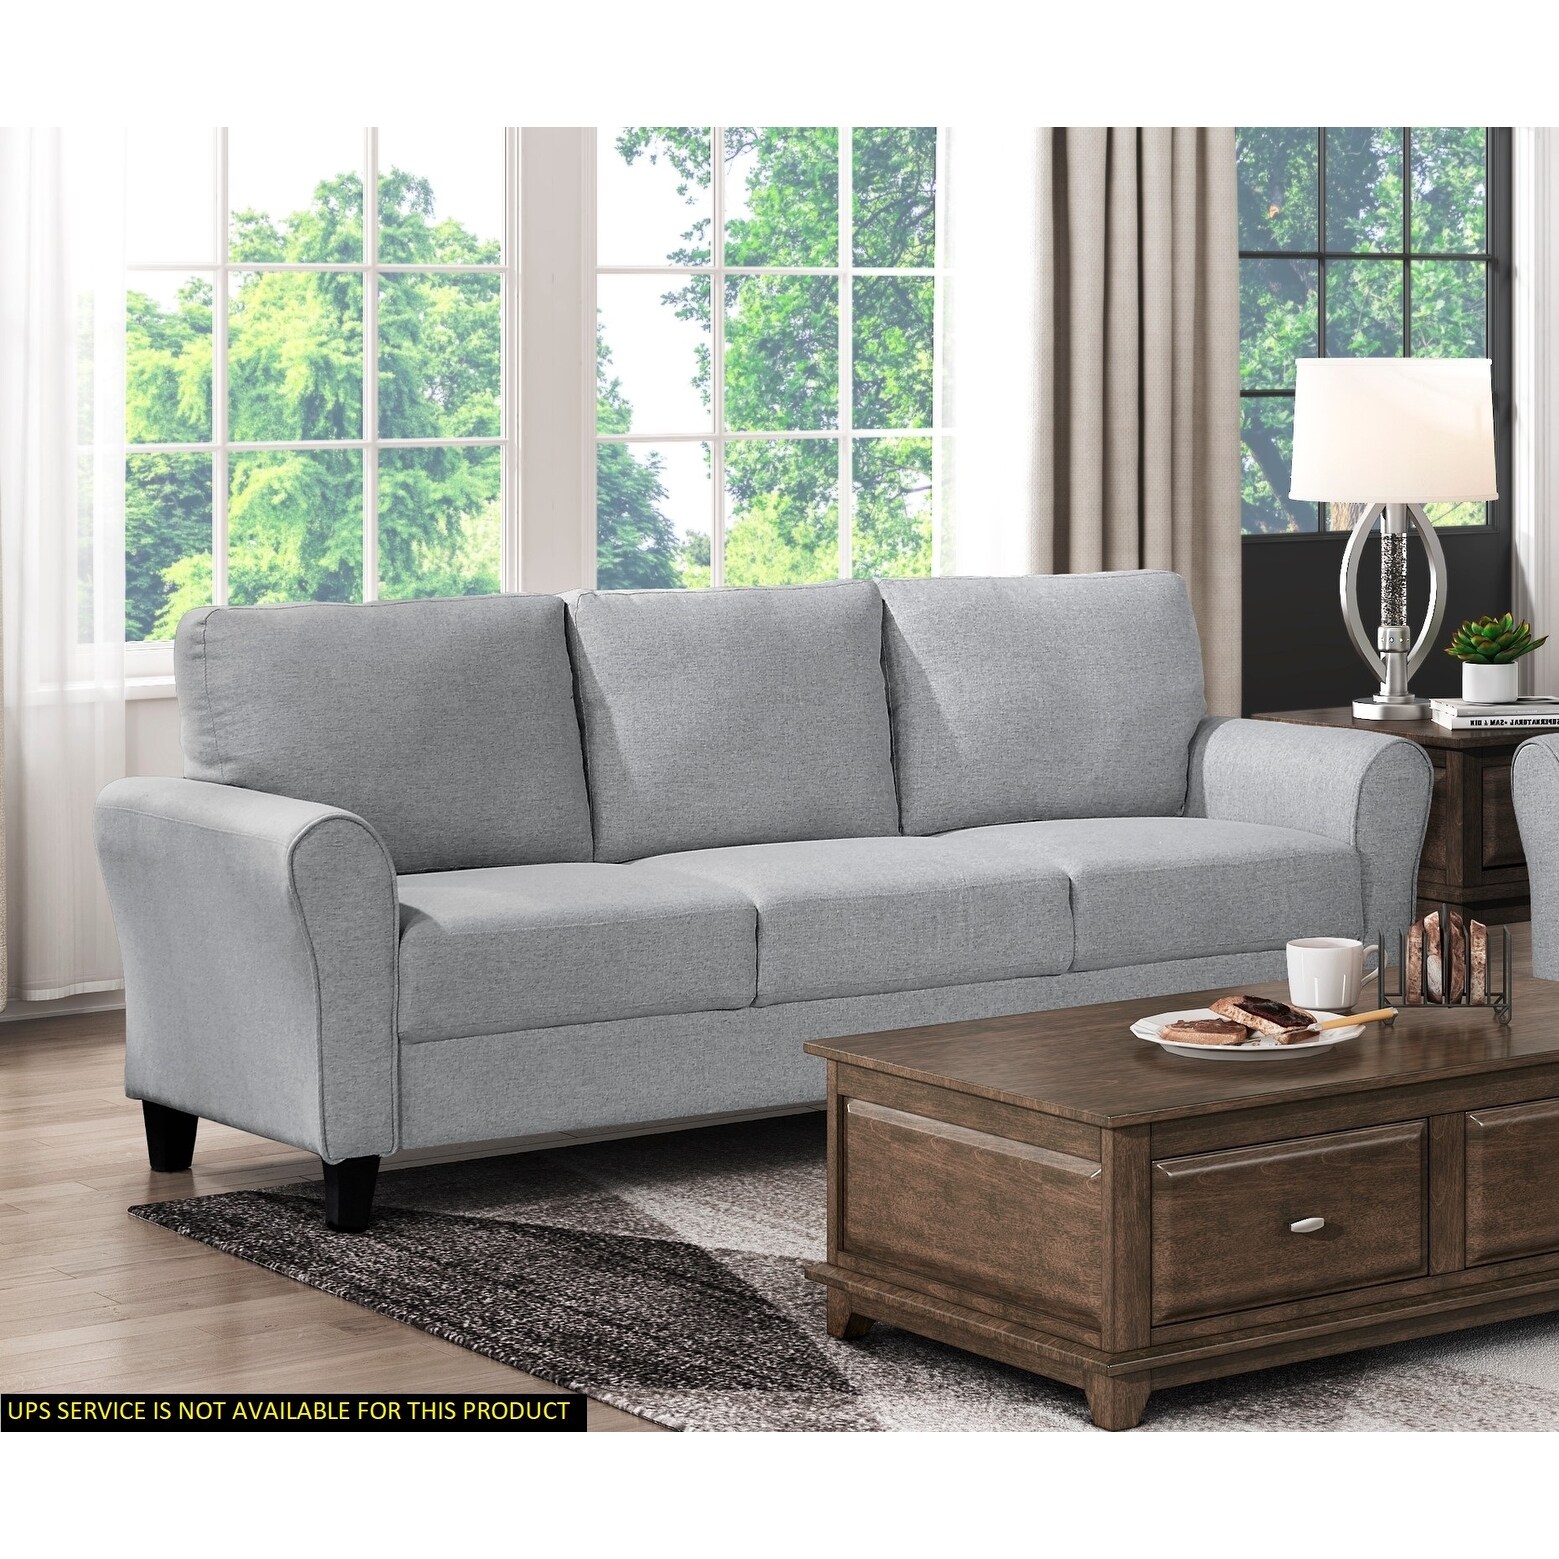 Dark Gray Modern 1pc Fabric Upholstered Sofa  Rounded Arms  Attached Cushions   Transitional Living Room Furniture  Dark Gray